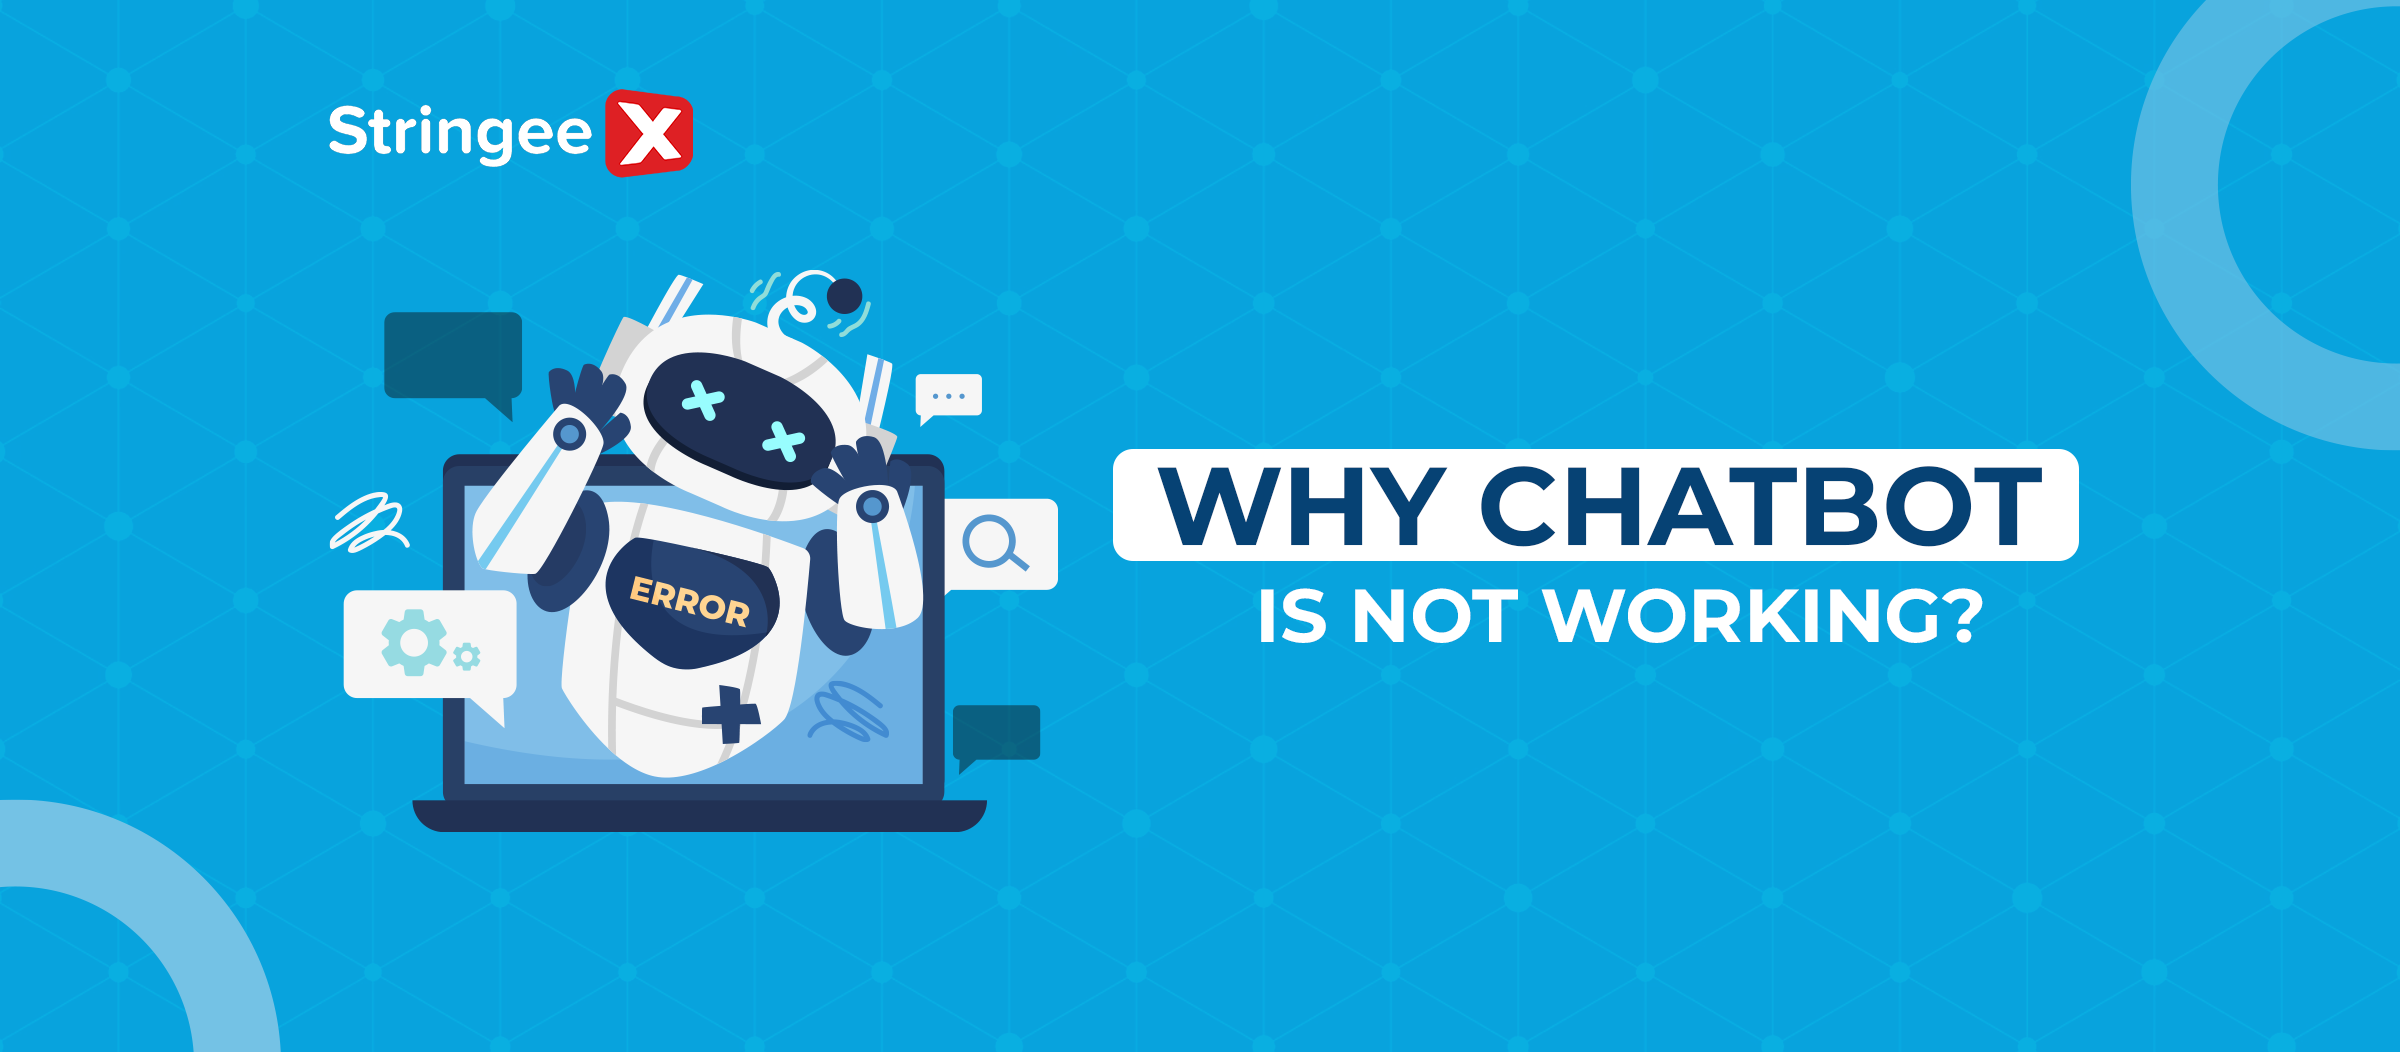 Decoding The Dilemma: Why Chatbot Is Not Working?